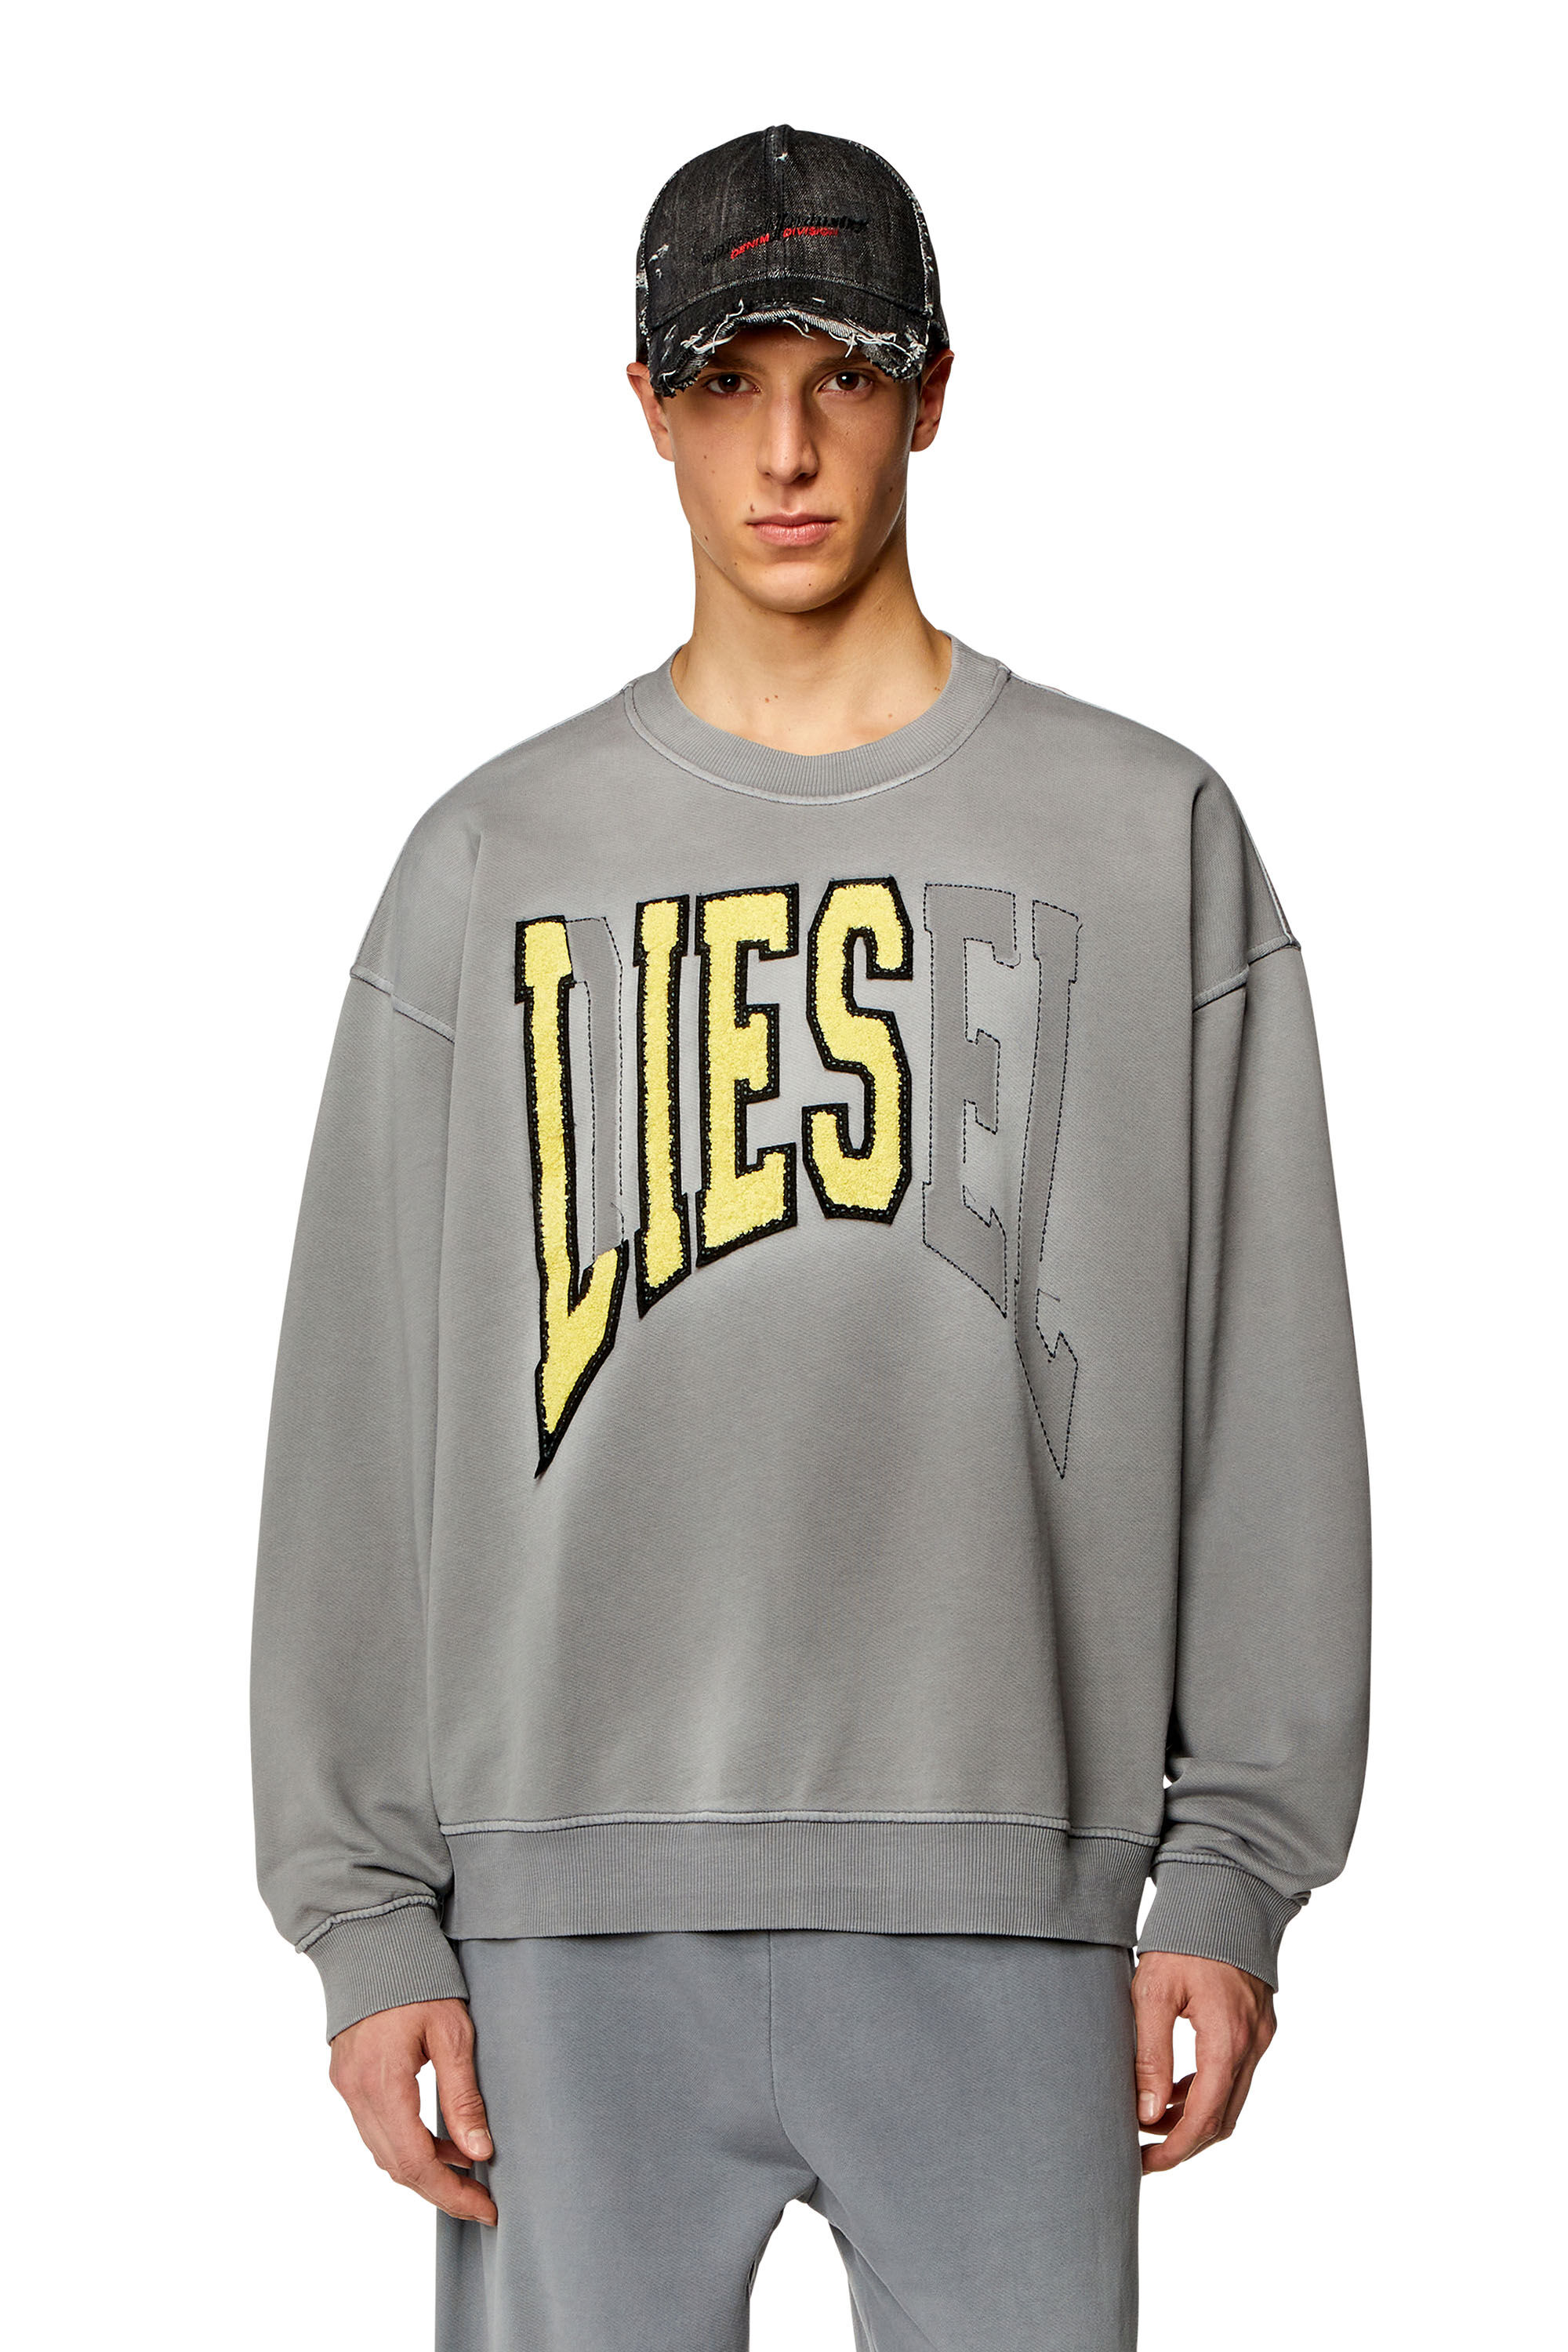 Diesel - S-BOXT-N6, Man College sweatshirt with LIES patches in Grey - Image 3